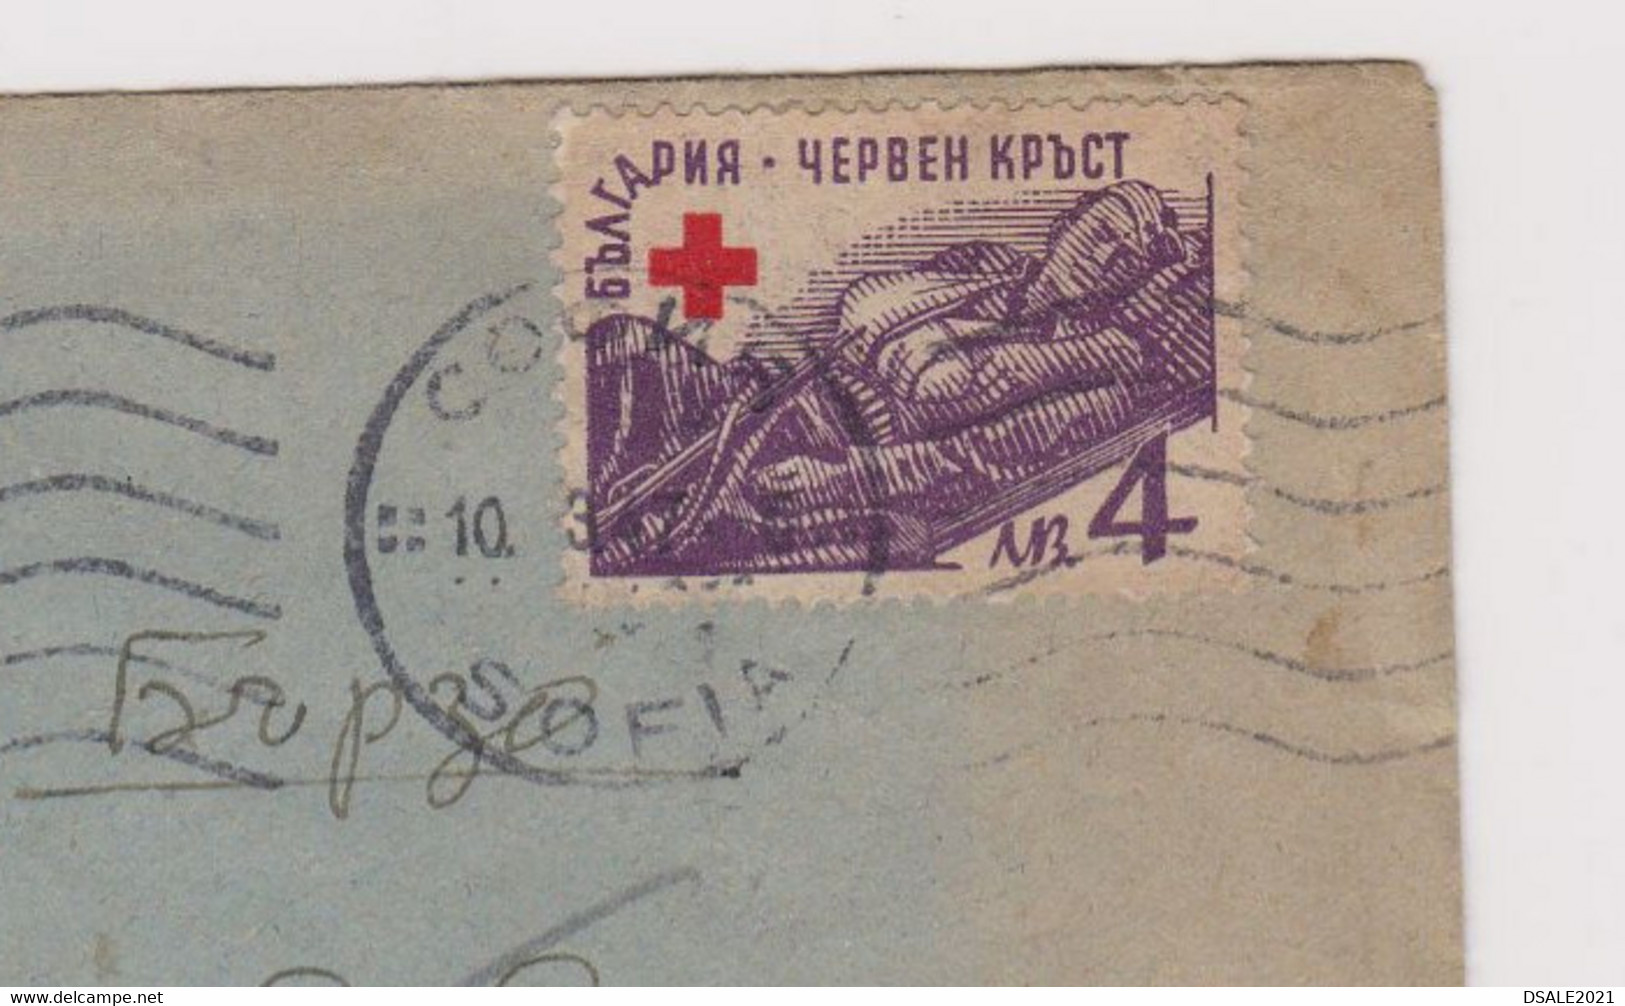 Bulgaria Bulgarie Bulgarije 1947 Cover W/Mi-Nr.517/4Lv. Topic Stamp Red Cross Wounded Soldier Domestic Used (ds438) - Brieven En Documenten